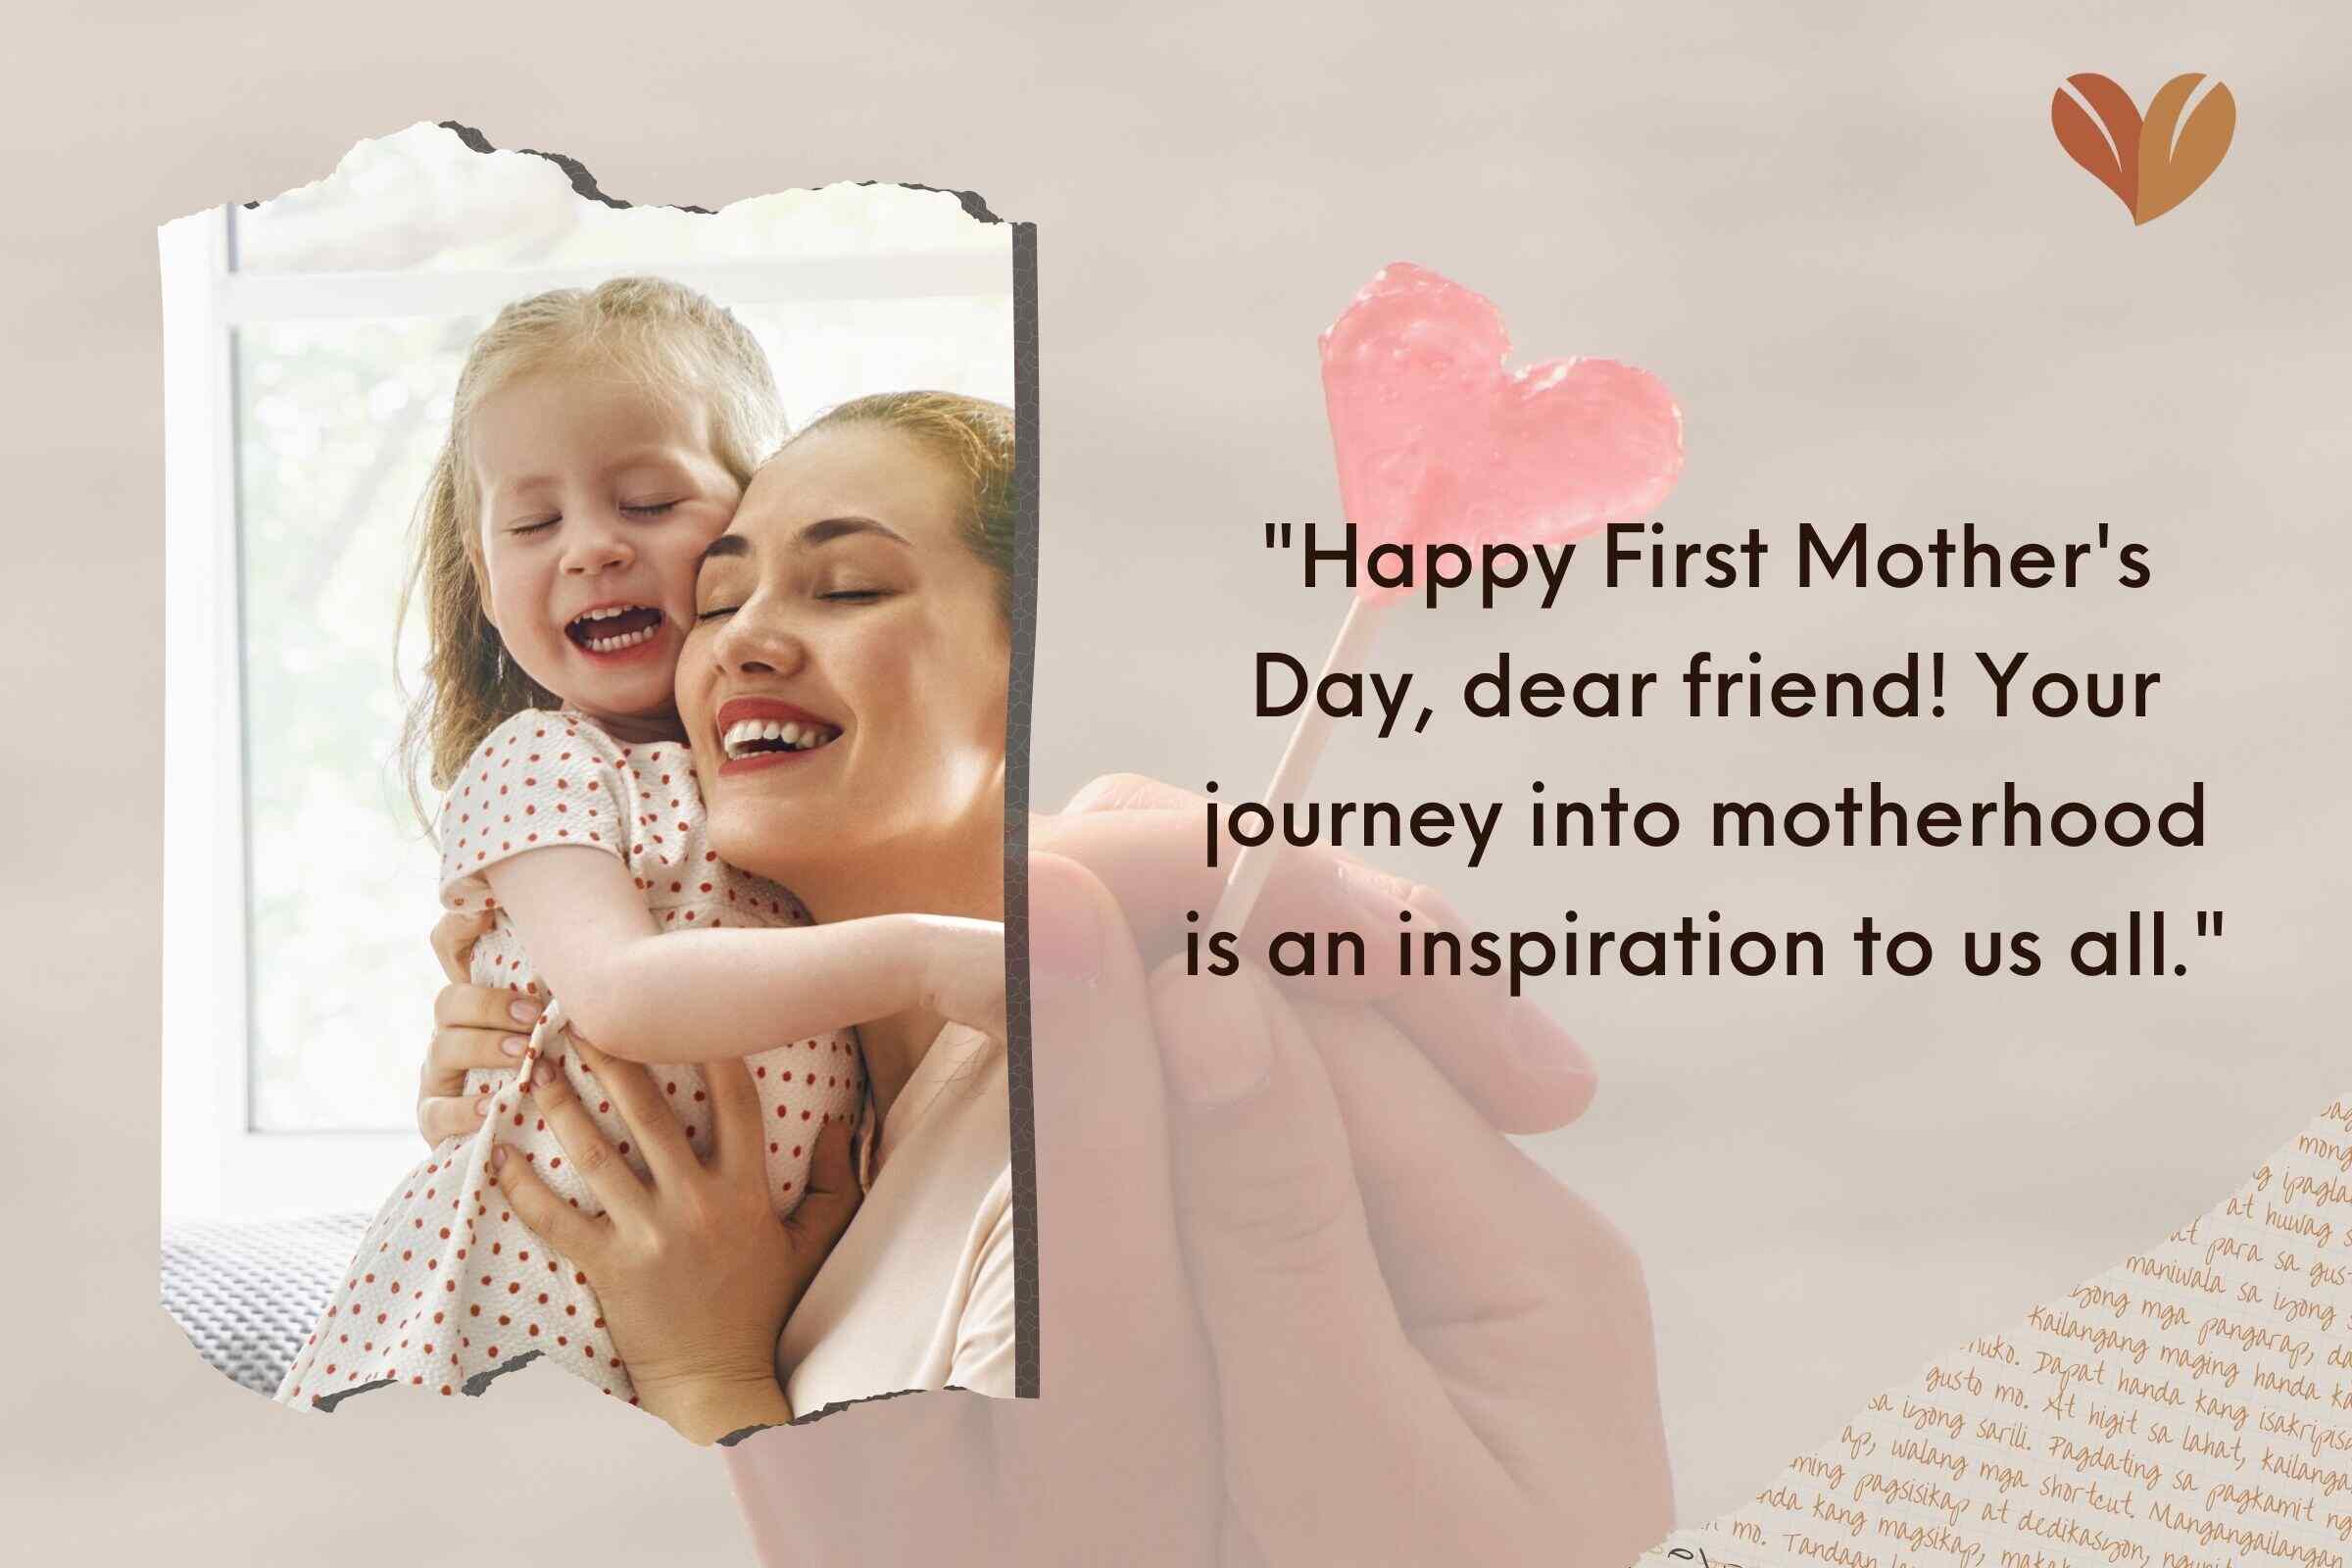 Happy First Mother's Day Messages to a Friend